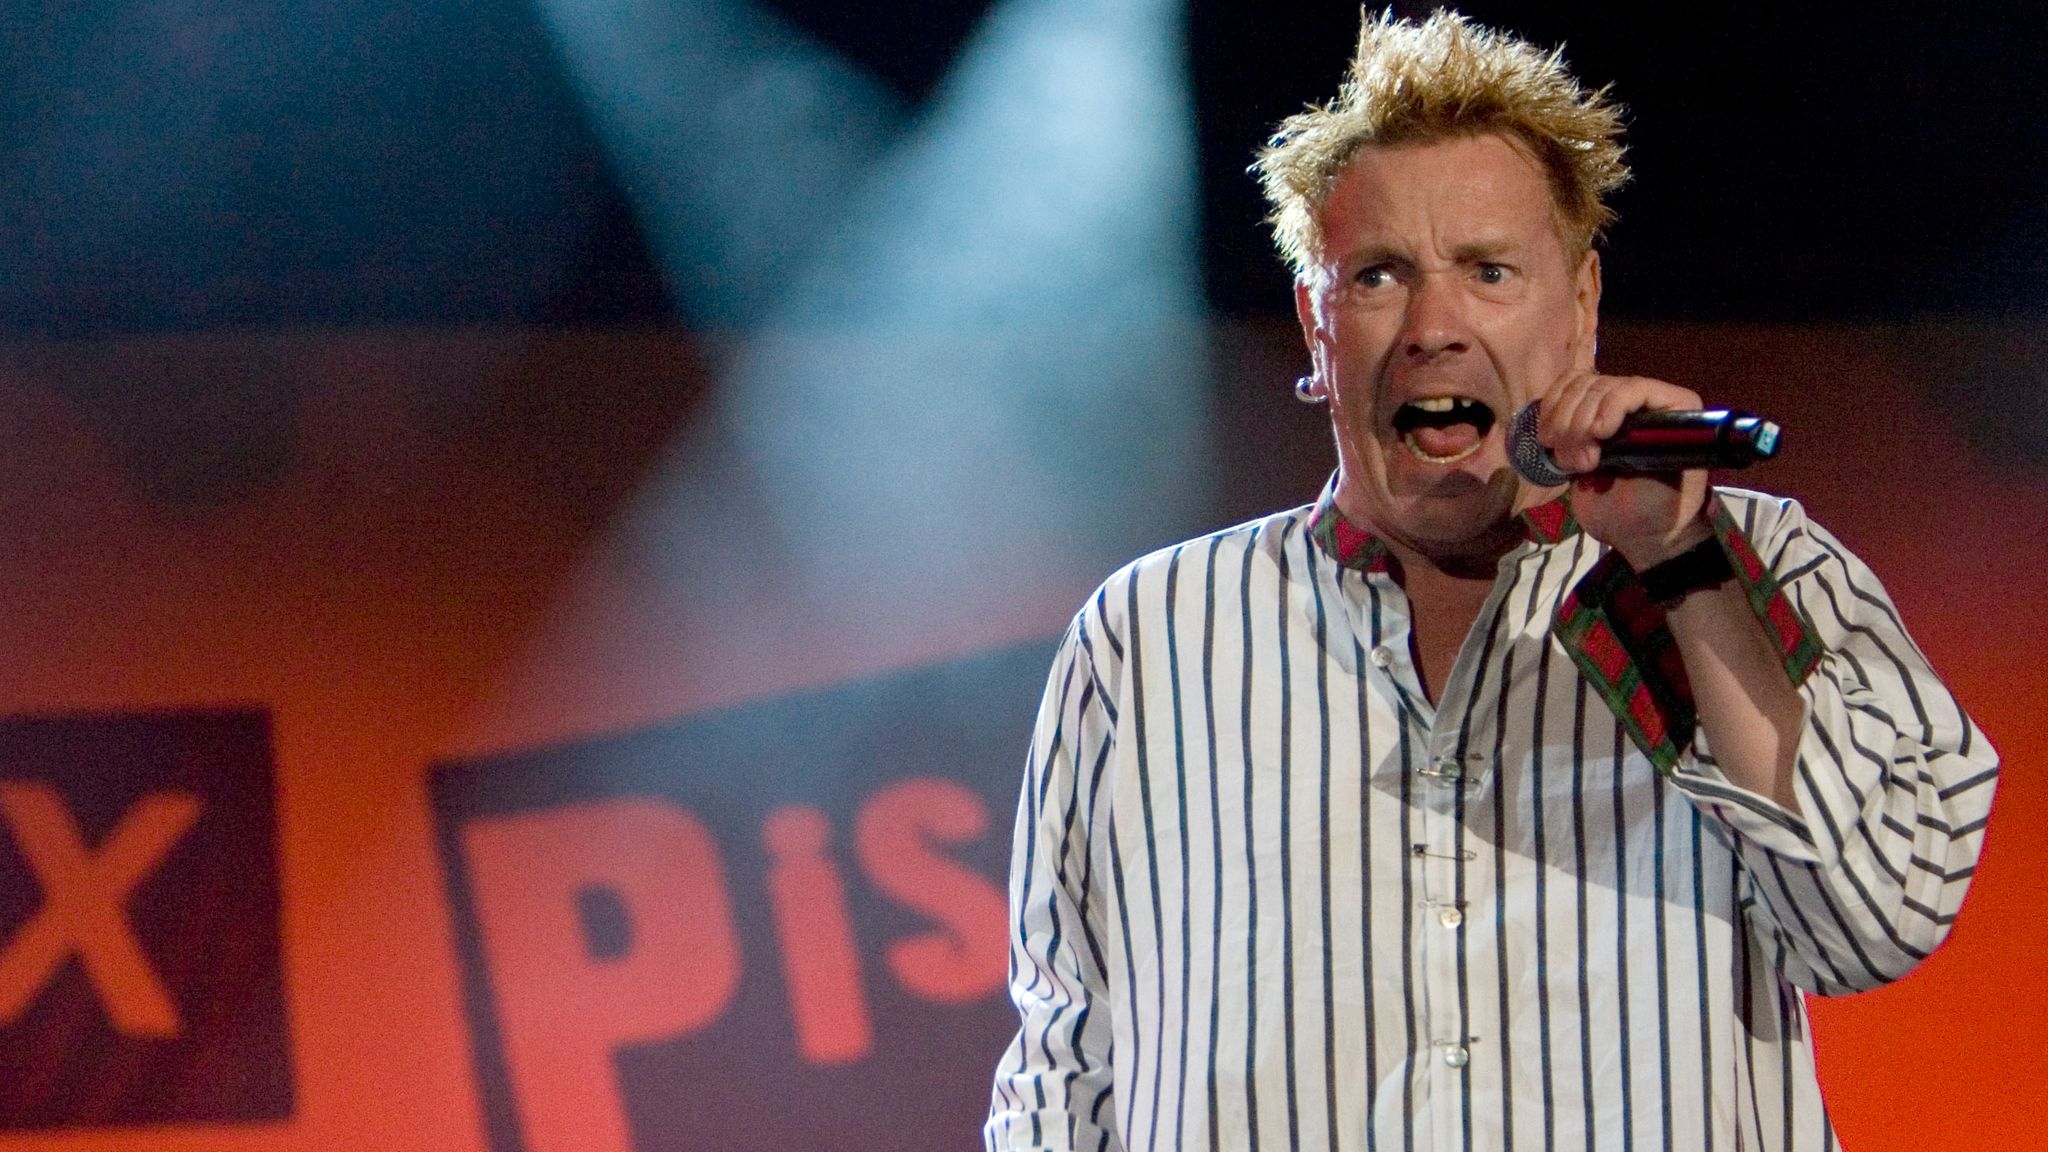 Sex Pistols Former Members Suing Johnny Rotten Over Right To Use Group